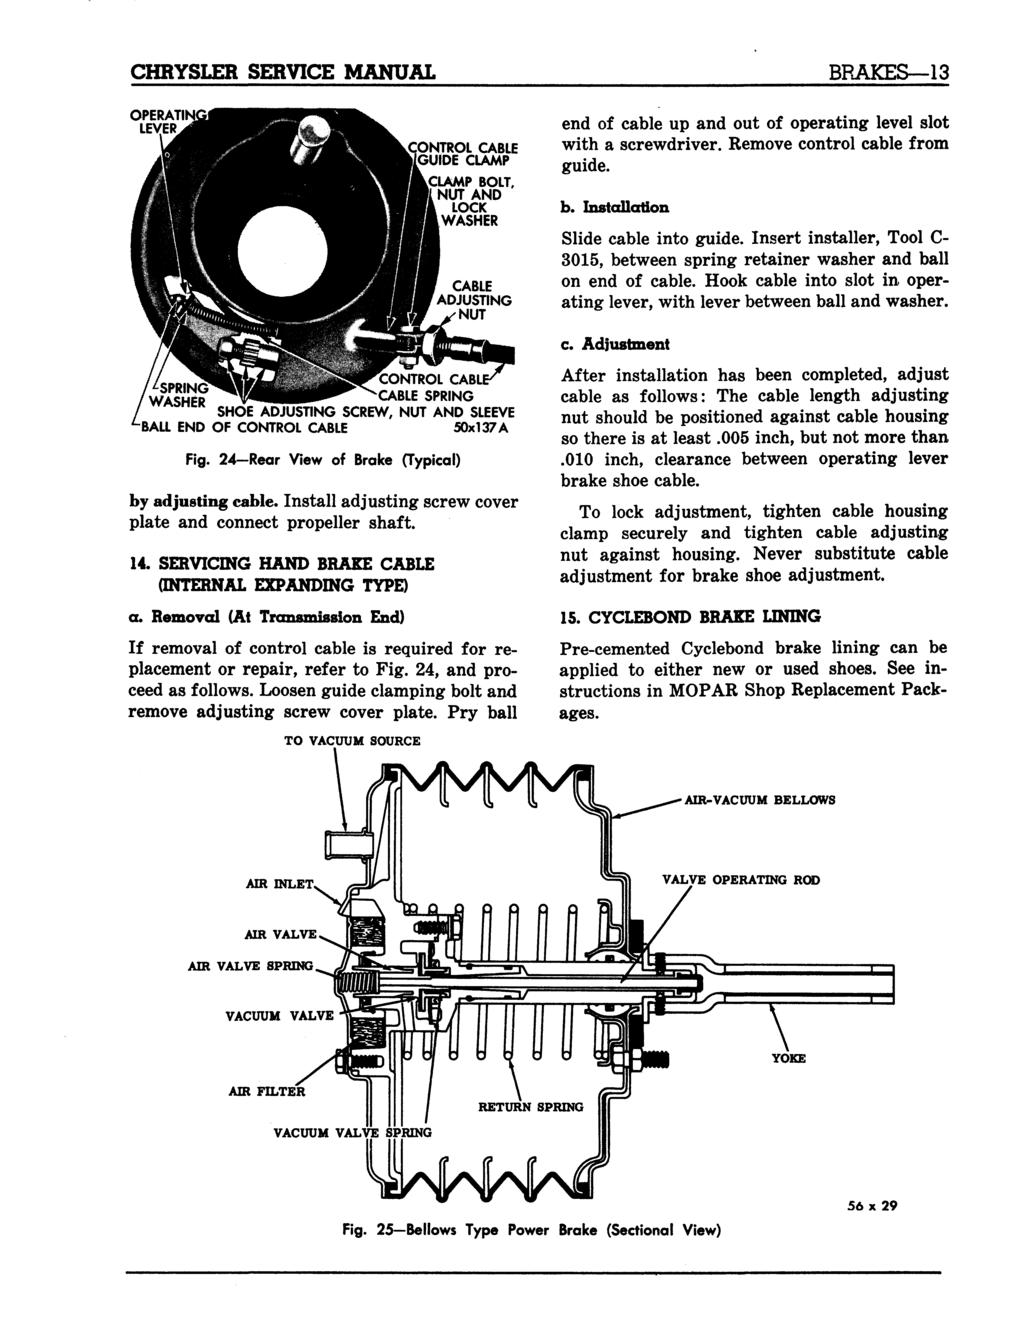 CHRYSLER SERVICE MANUAL BRAKES 13 OPERATI LEVER NTROL CABLE GUIDE CLAMP CLAMP BOLT, NUT AND LOCK WASHER end of cable up and out of operating level slot with a screwdriver.